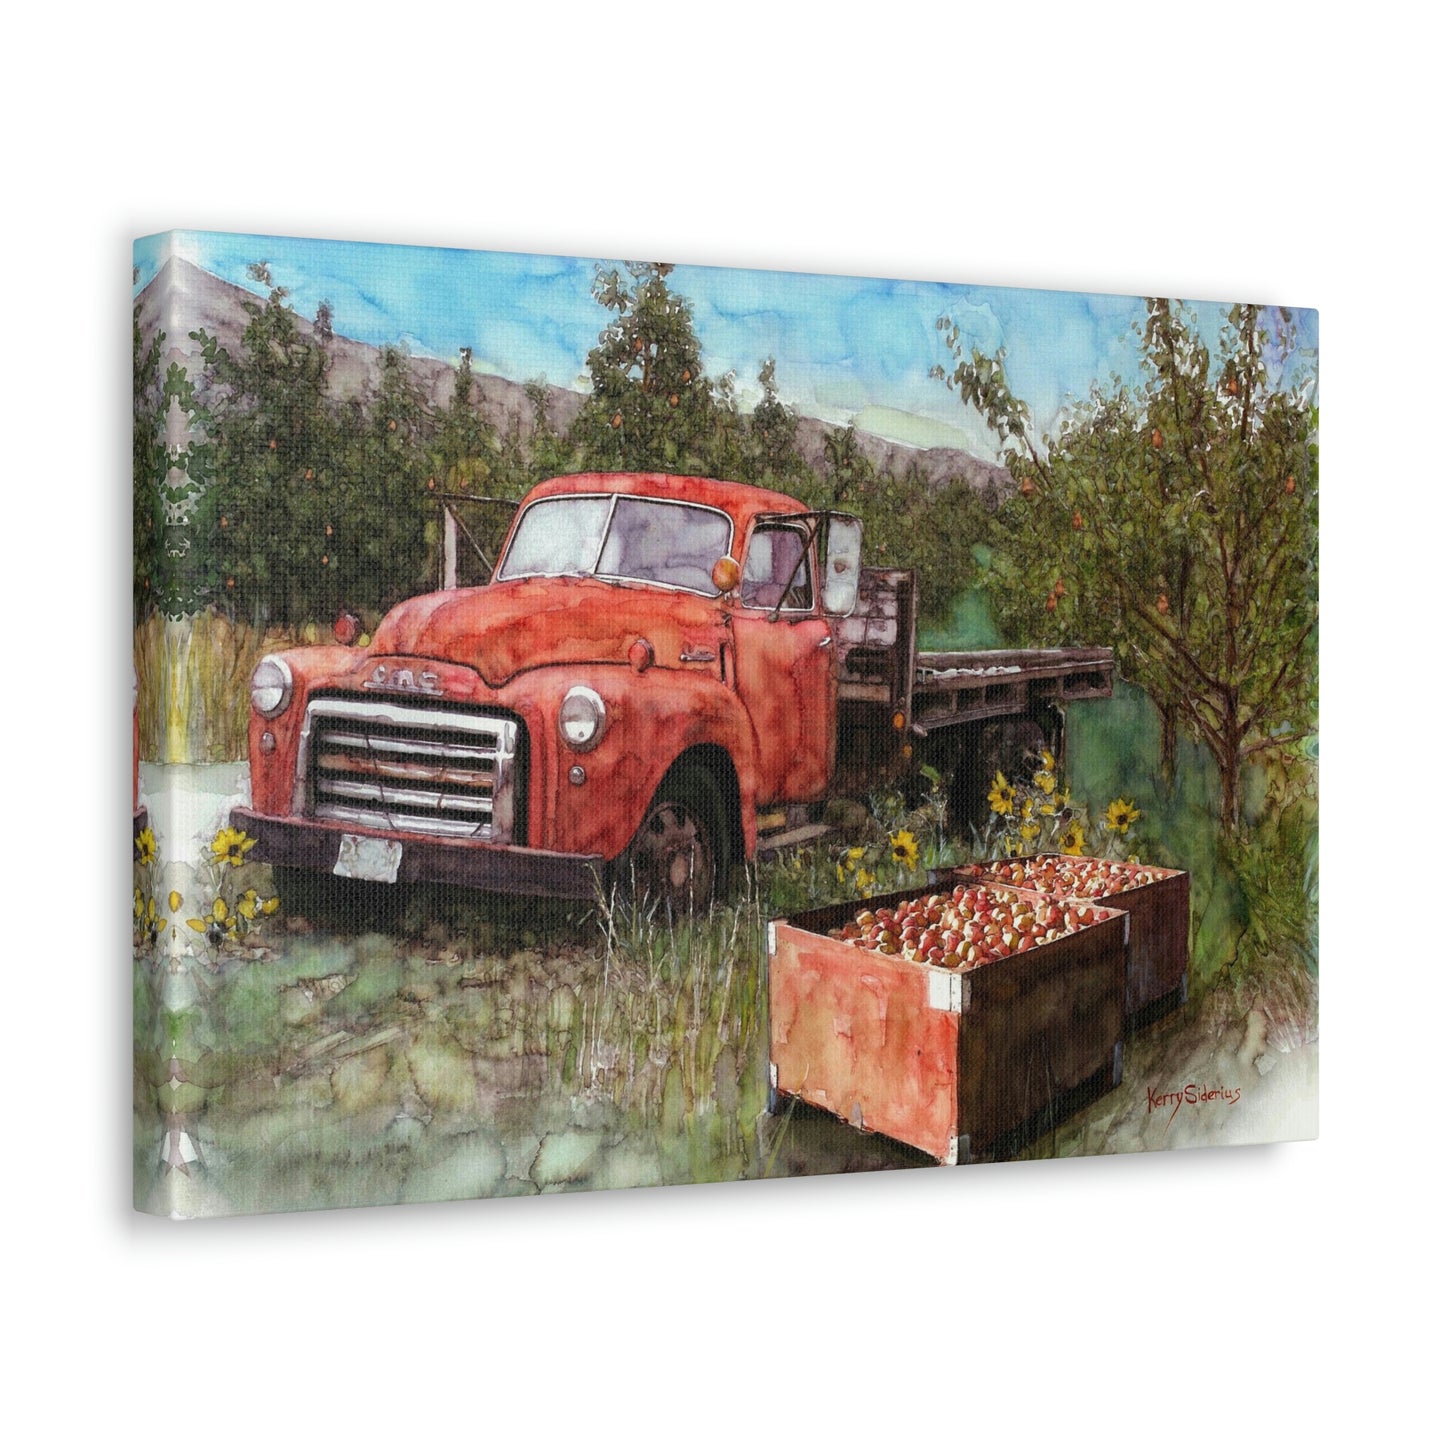 "Picking Apples in Orondo" Gallery-Wrapped Canvas - Kerry Siderius Art 